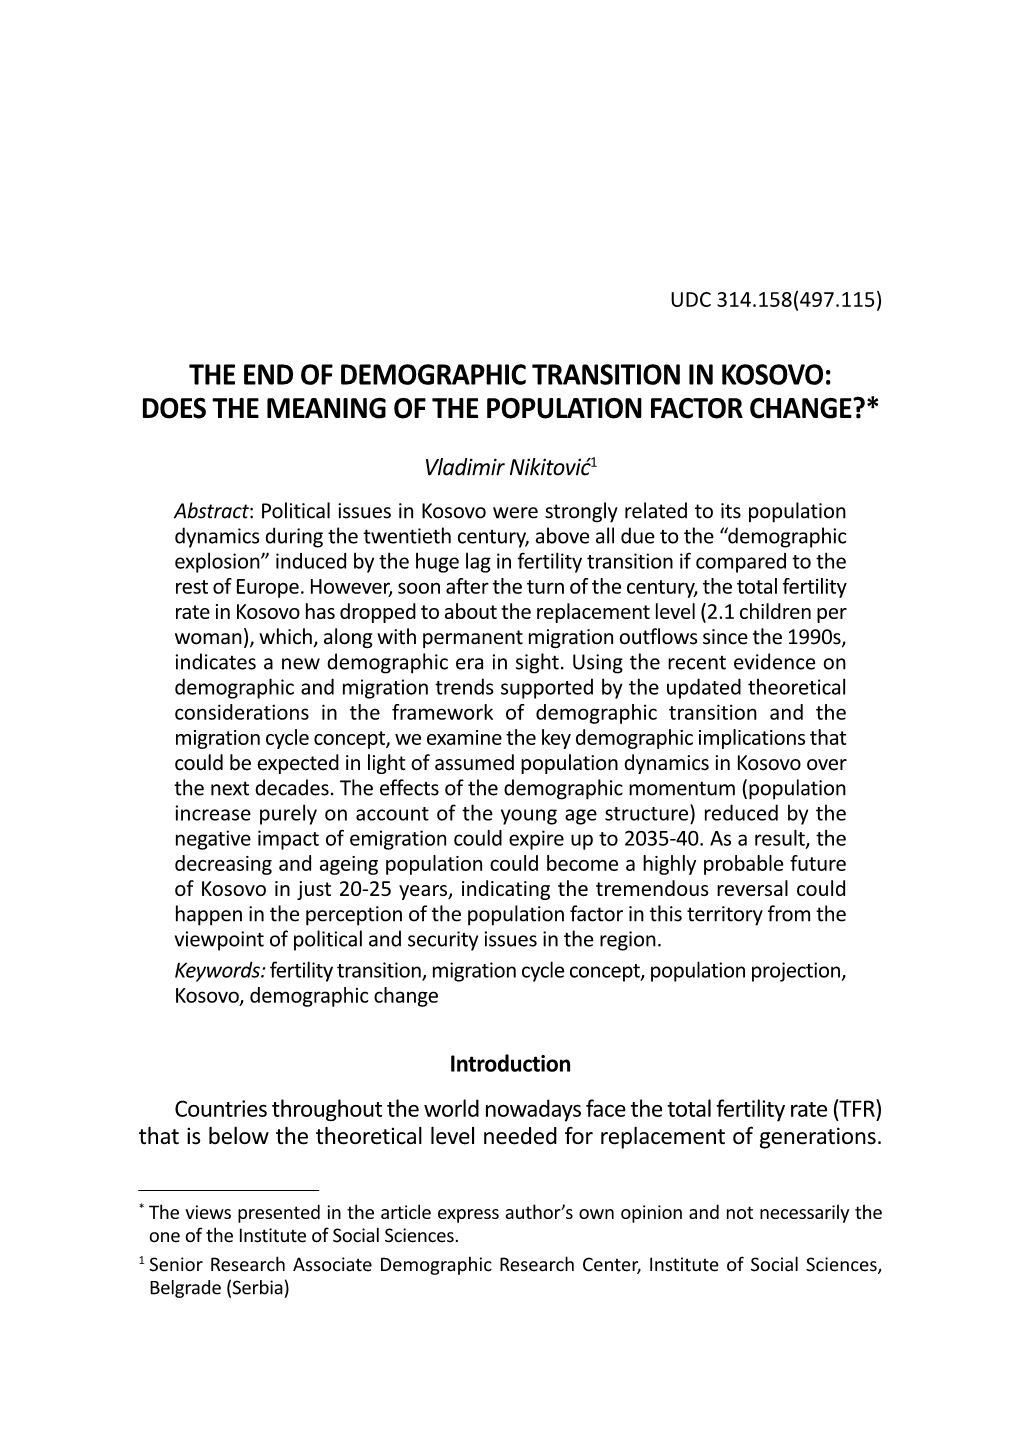 The End of Demographic Transition in Kosovo: Does the Meaning of the Population Factor Change?*